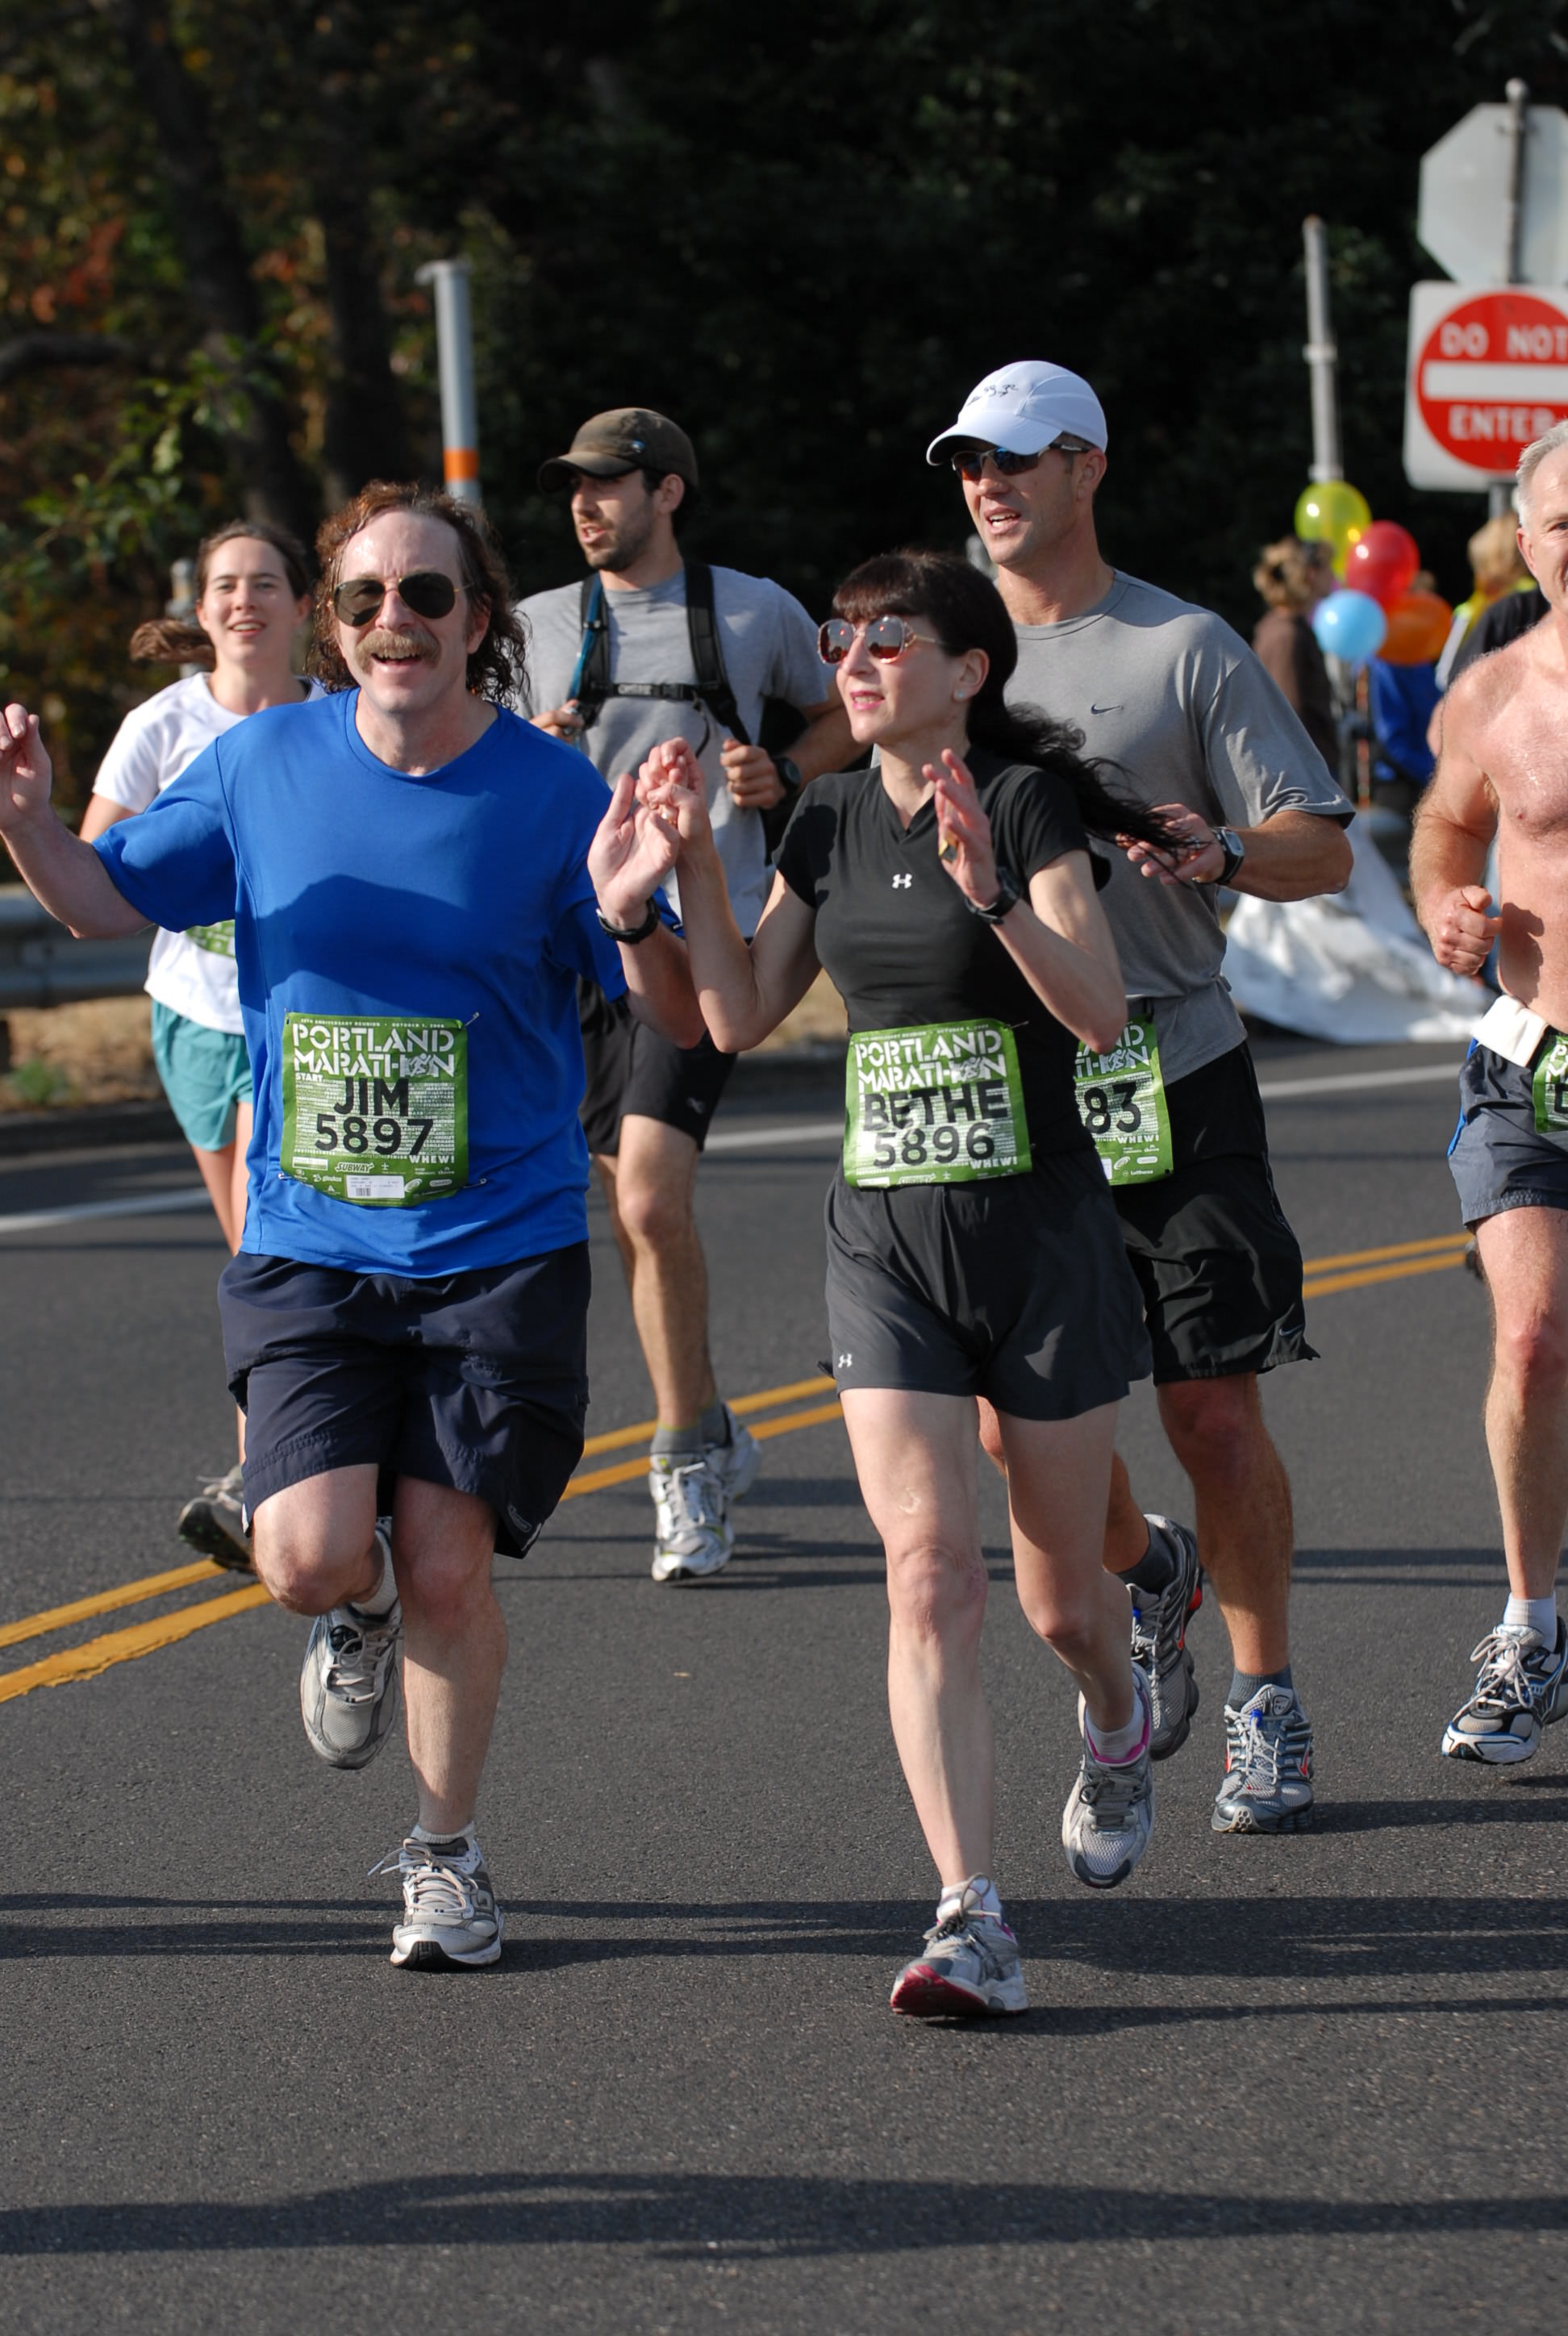 James Abney and Bethe Scalettar run in the Portland Marathon (at mile 20).